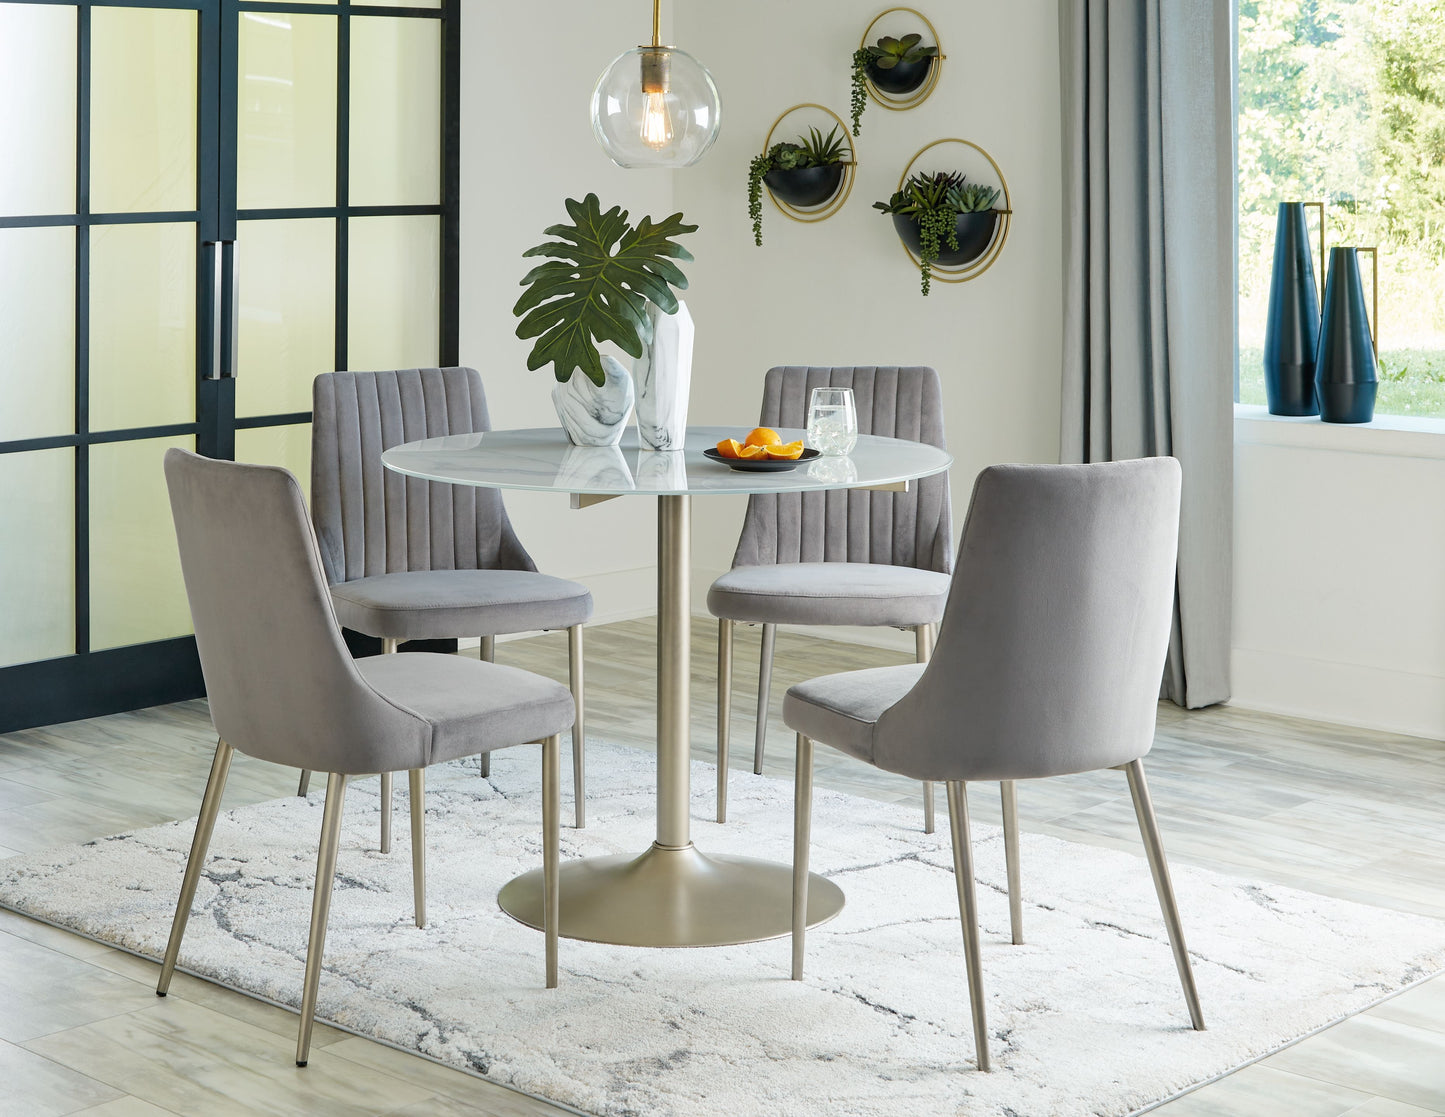 Barchoni - White / Gray - 5 Pc. - Dining Room Table, 4 Side Chairs